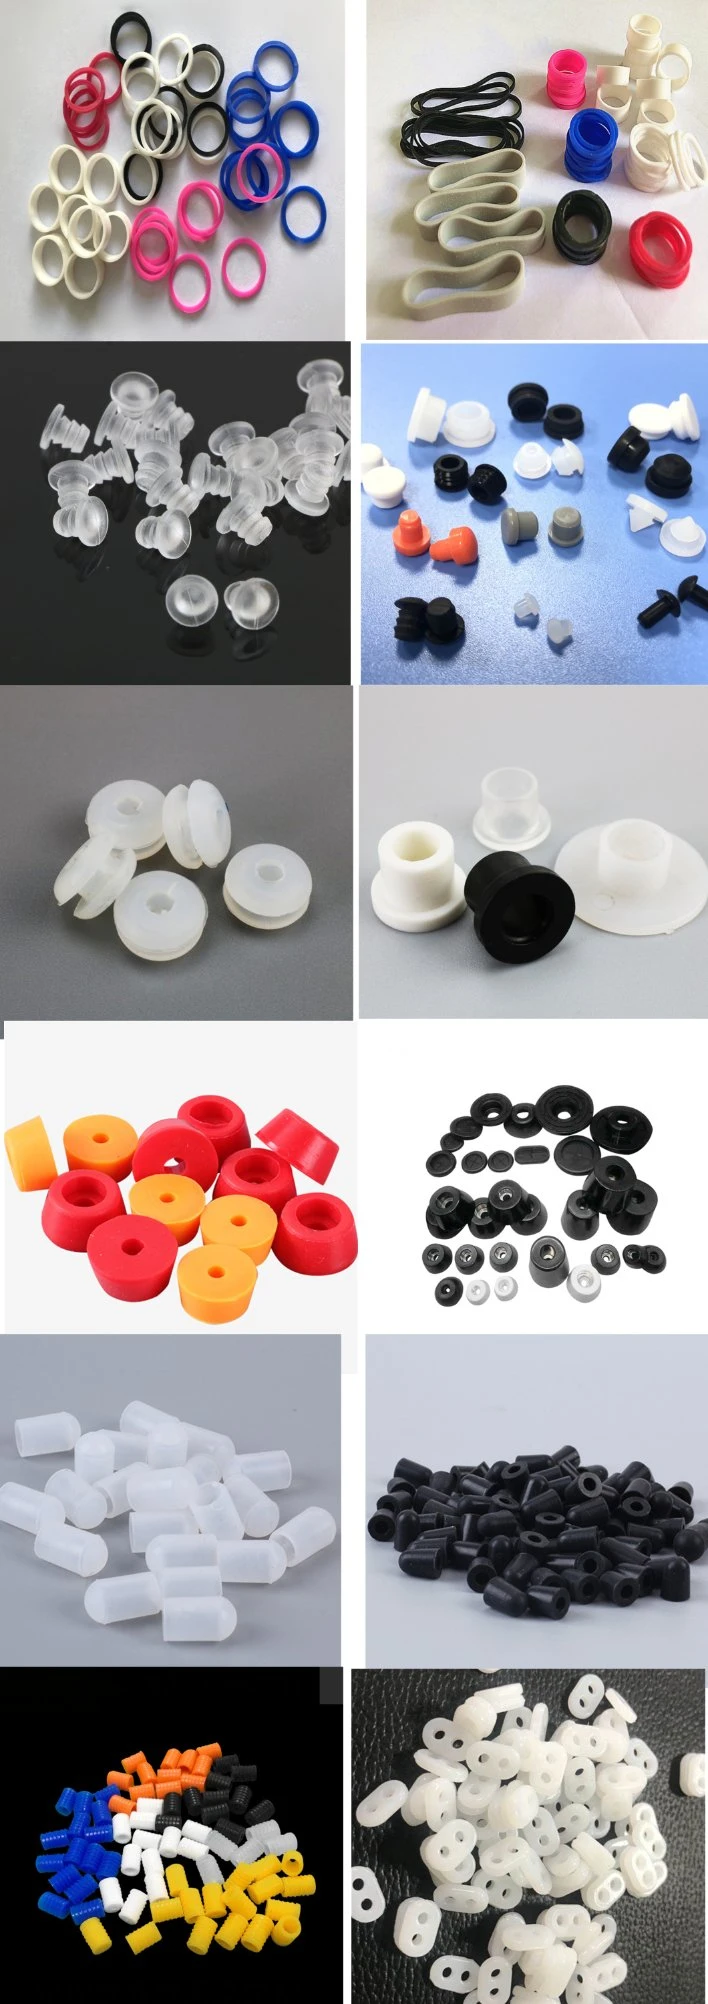 O-Ring O-Ring Wholesale Silicone Rubber NBR O-Ring Gasket